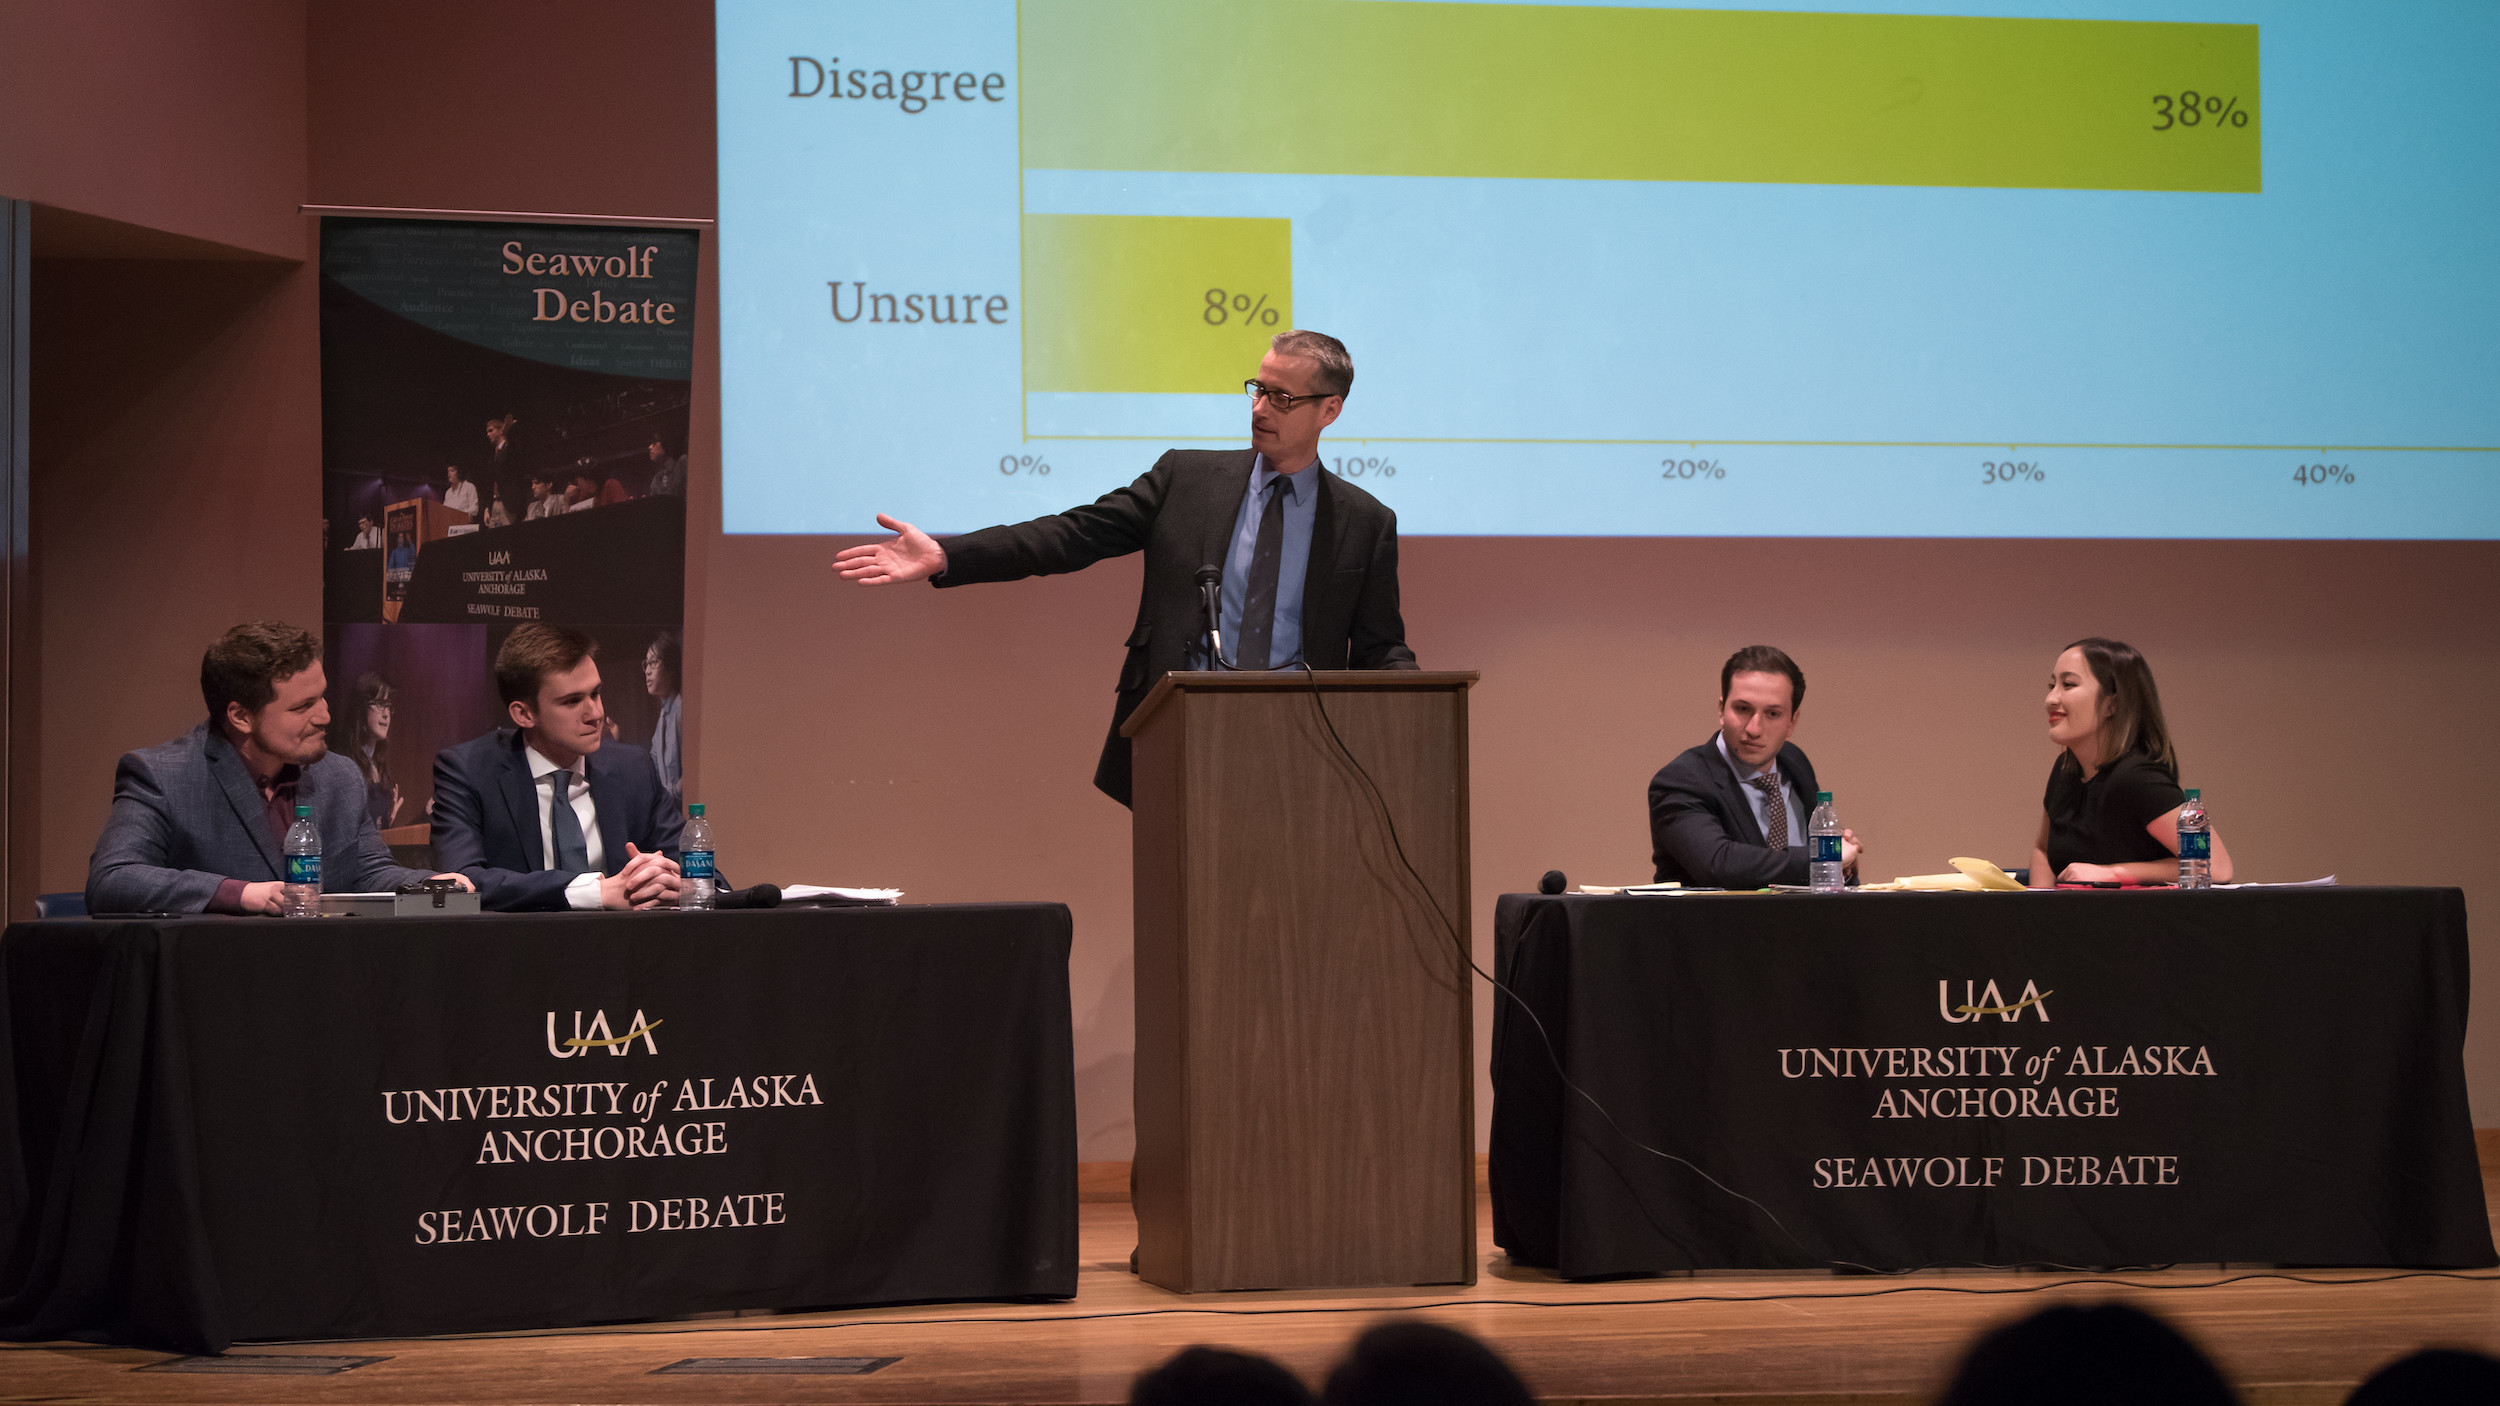 Seawolf Debate team vs. Standford, with moderator in the middle